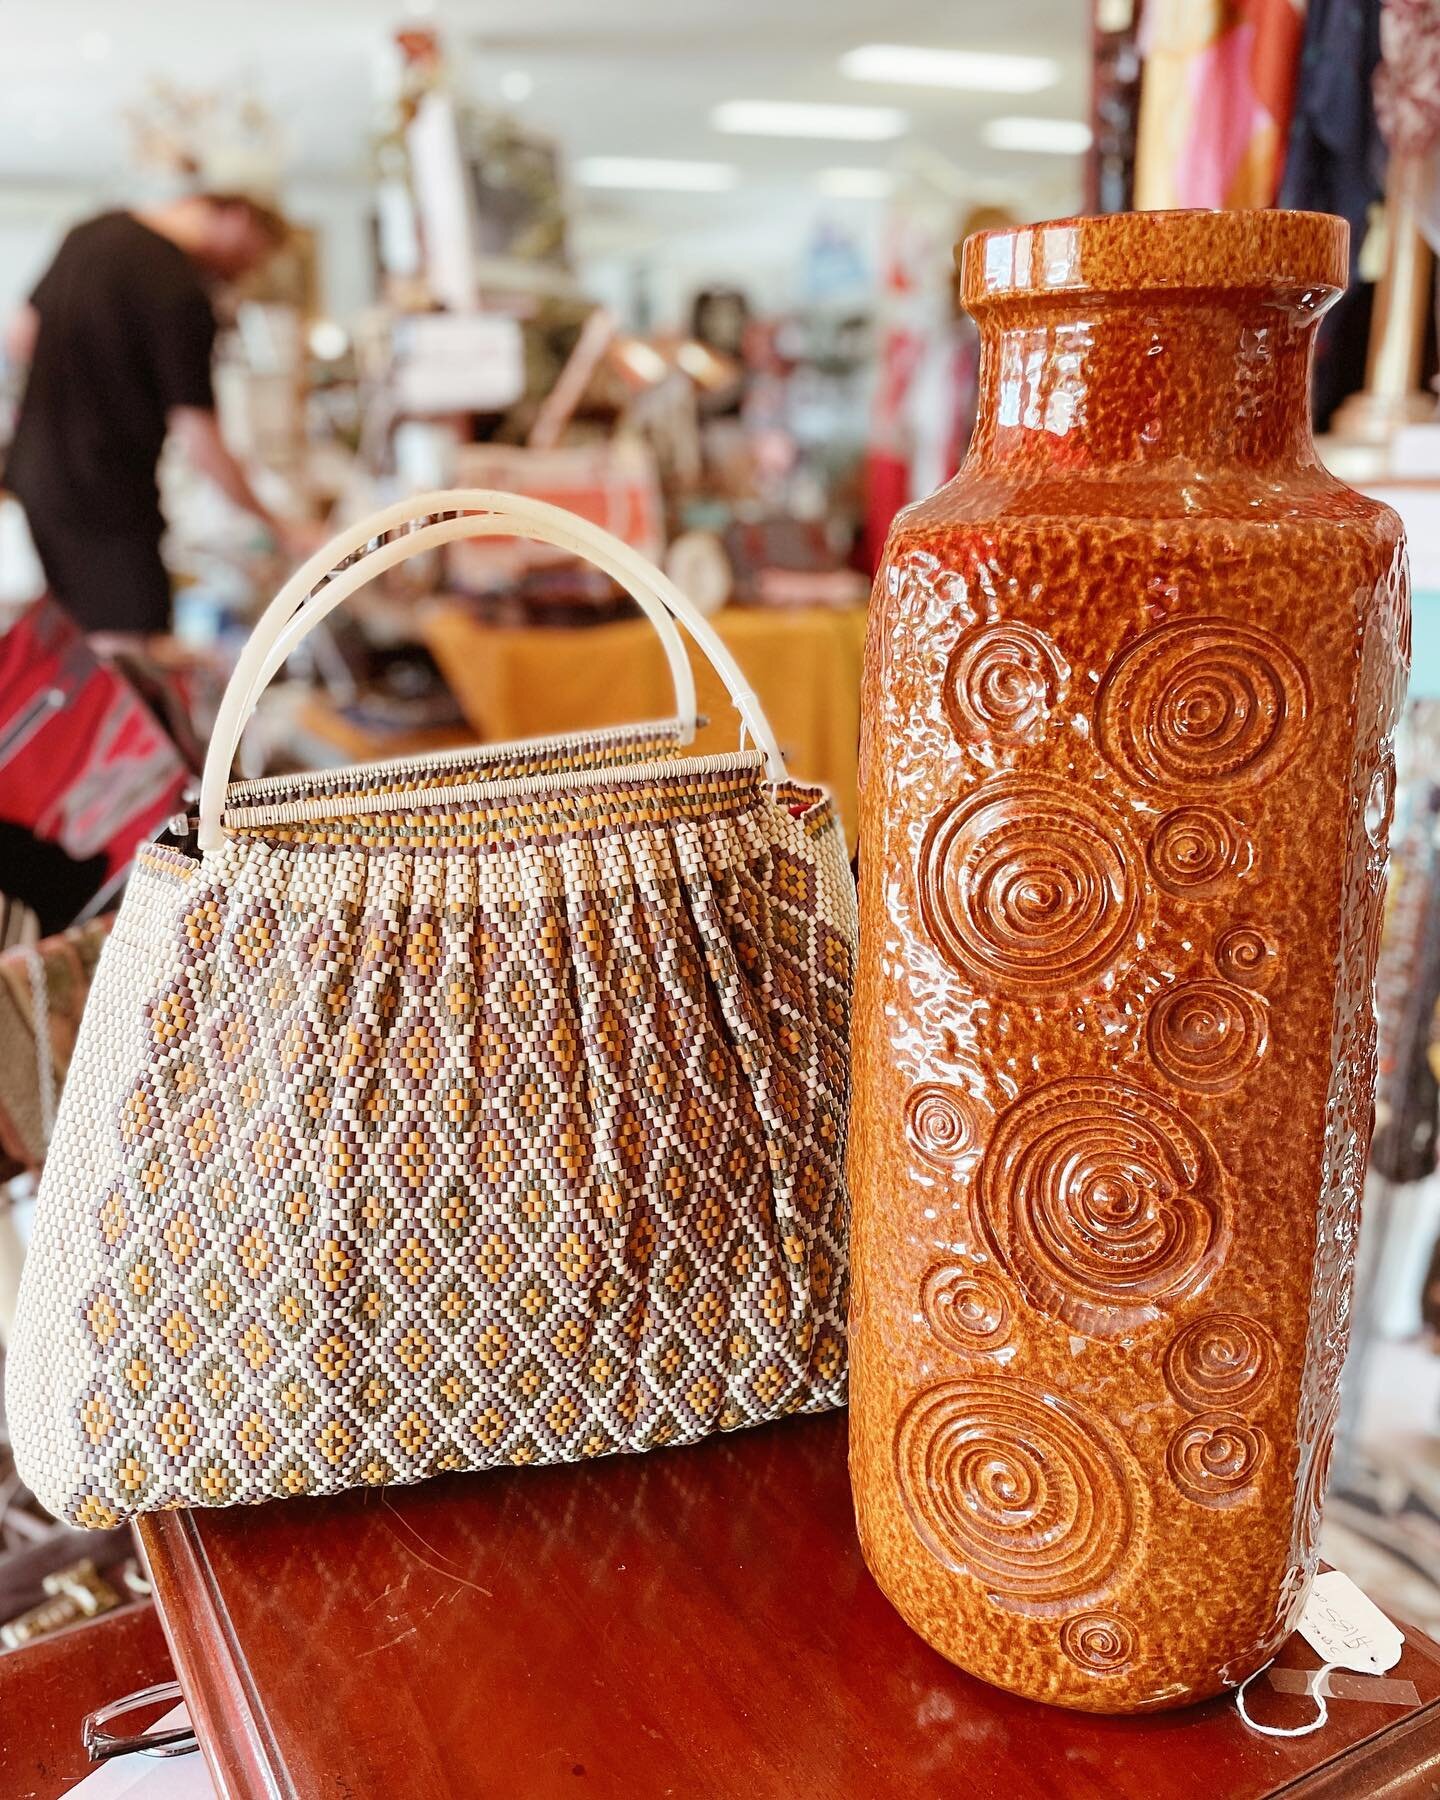 Because we can&rsquo;t make up our minds we want to know&hellip; 

Out of these two gorgeous vintage pieces, which would you prefer? 😋

A) West German Scheurich Pottery vase or&hellip;
B) Hand-made tube beaded tote bag? 

Let us know in the comments